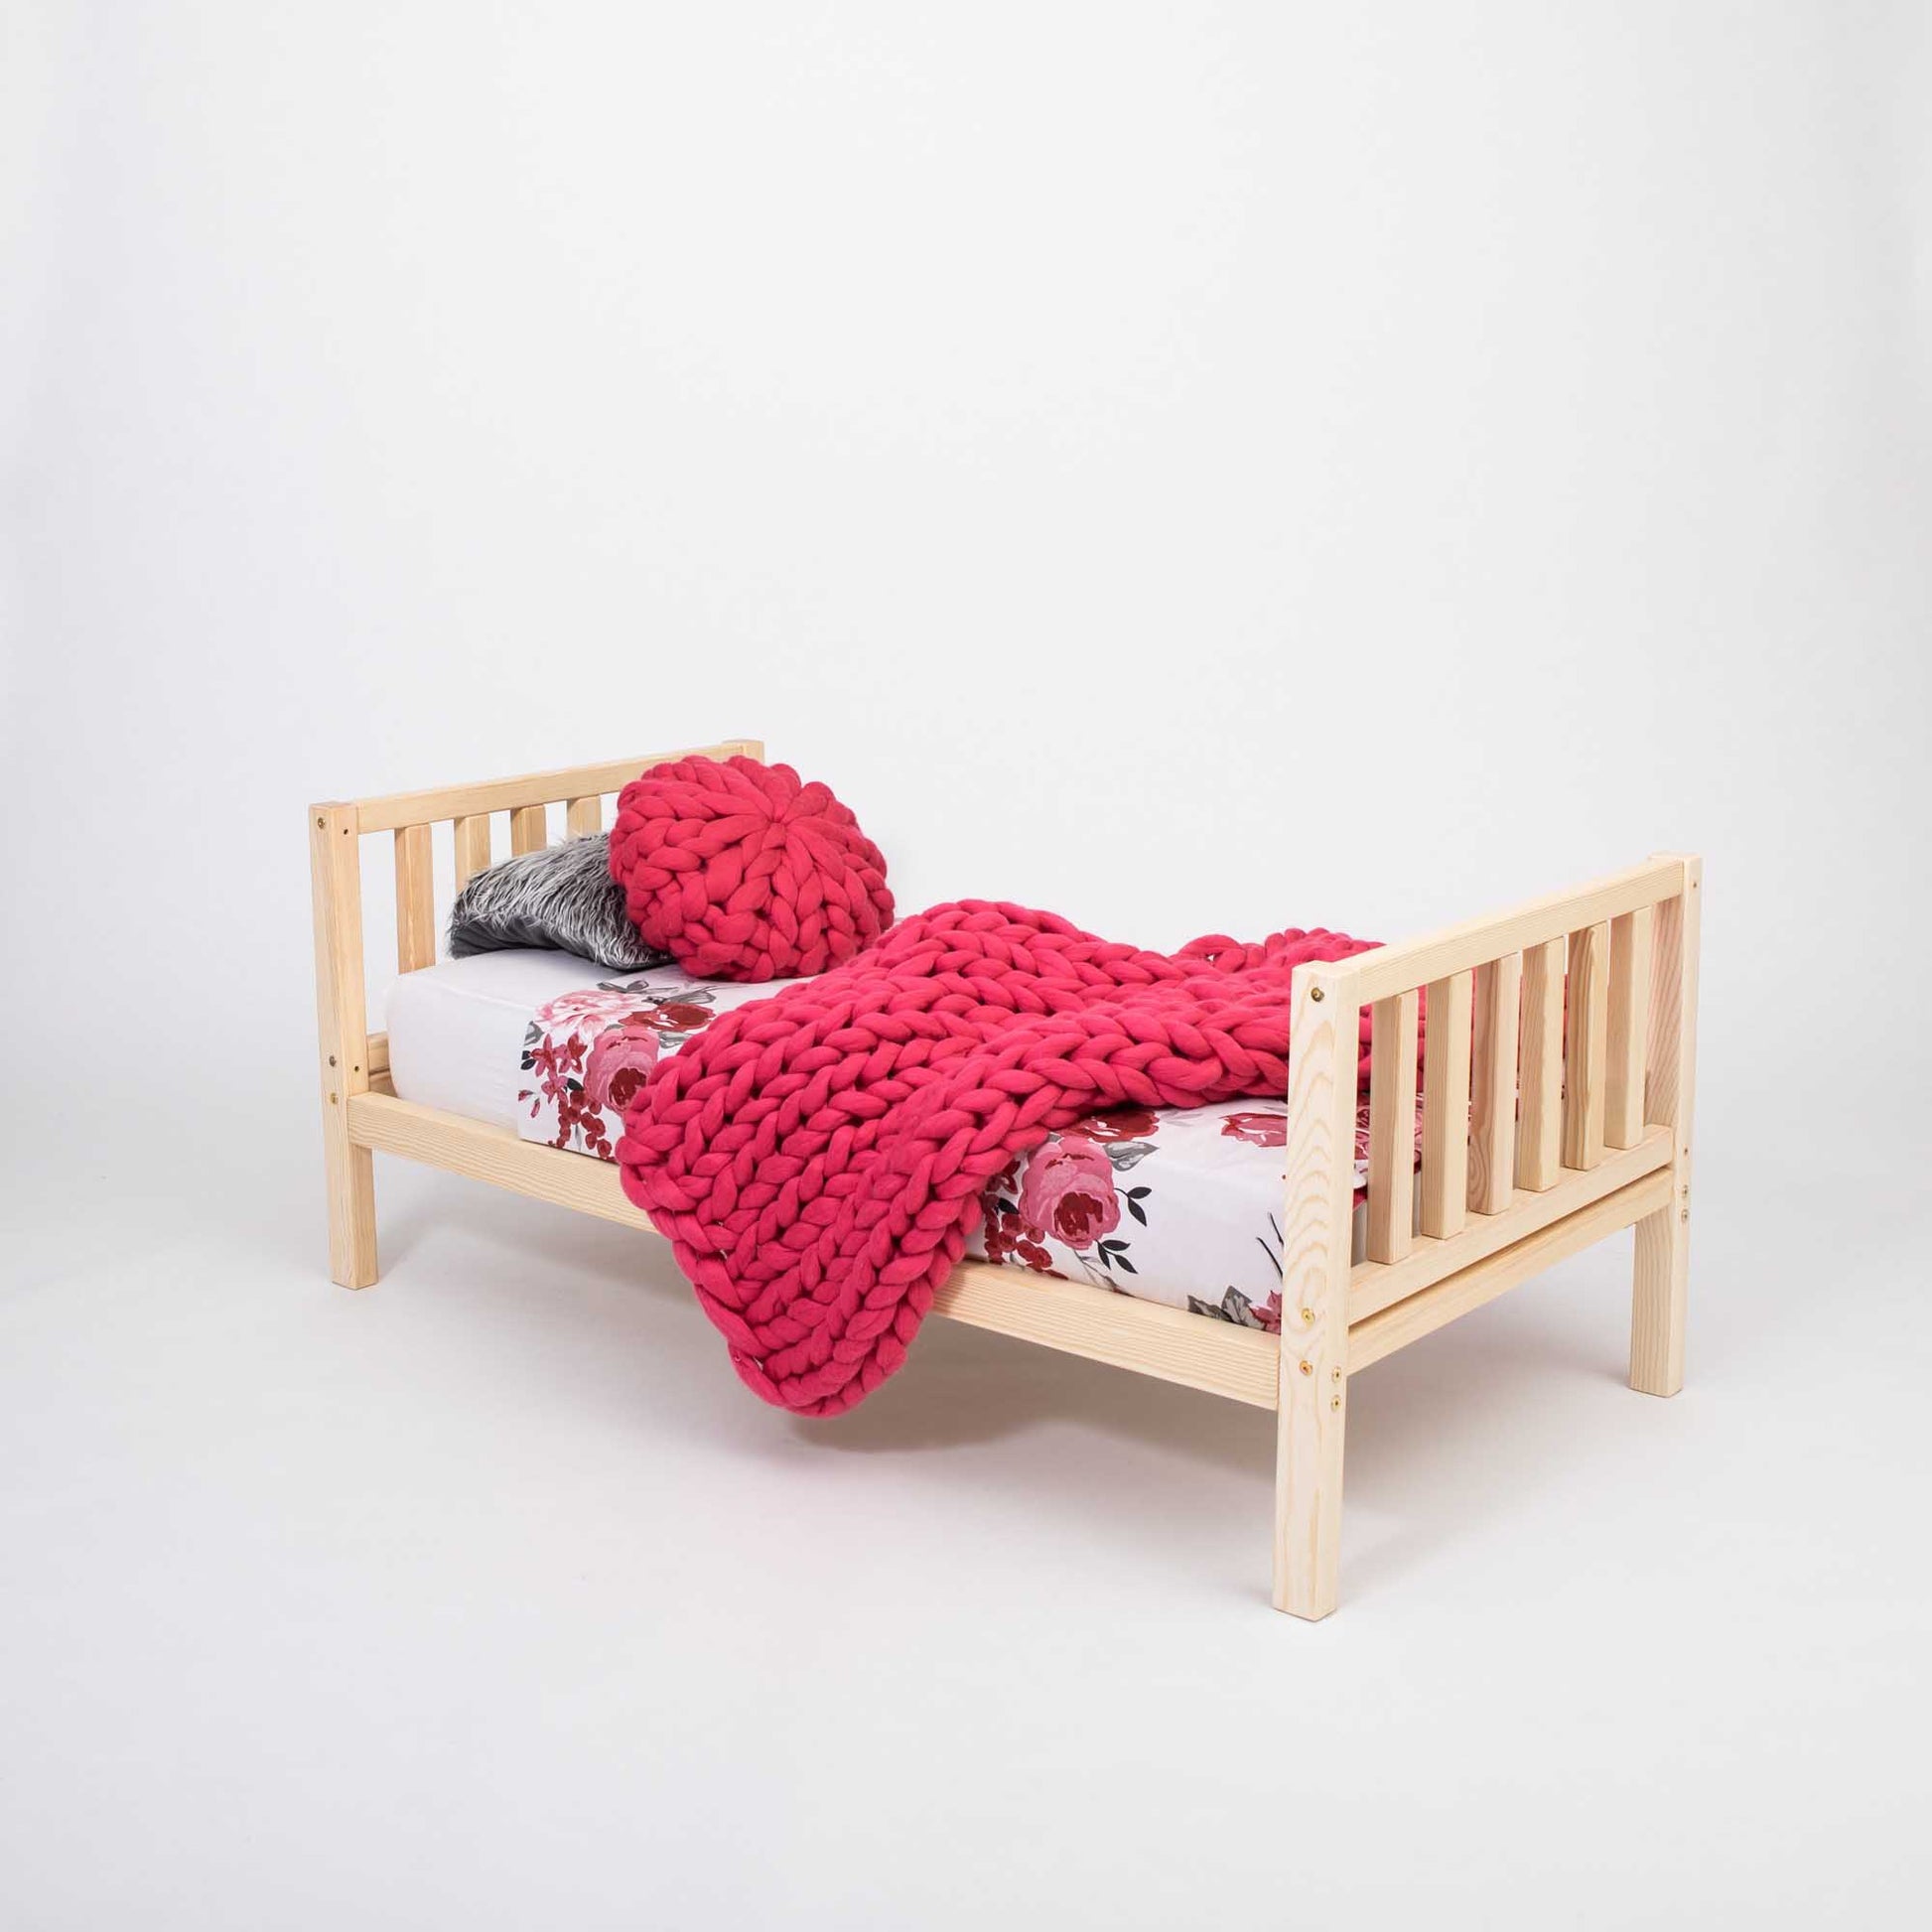 A Sweet Home From Wood raised kids' bed on legs with a headboard and footboard, with a pink blanket on it.